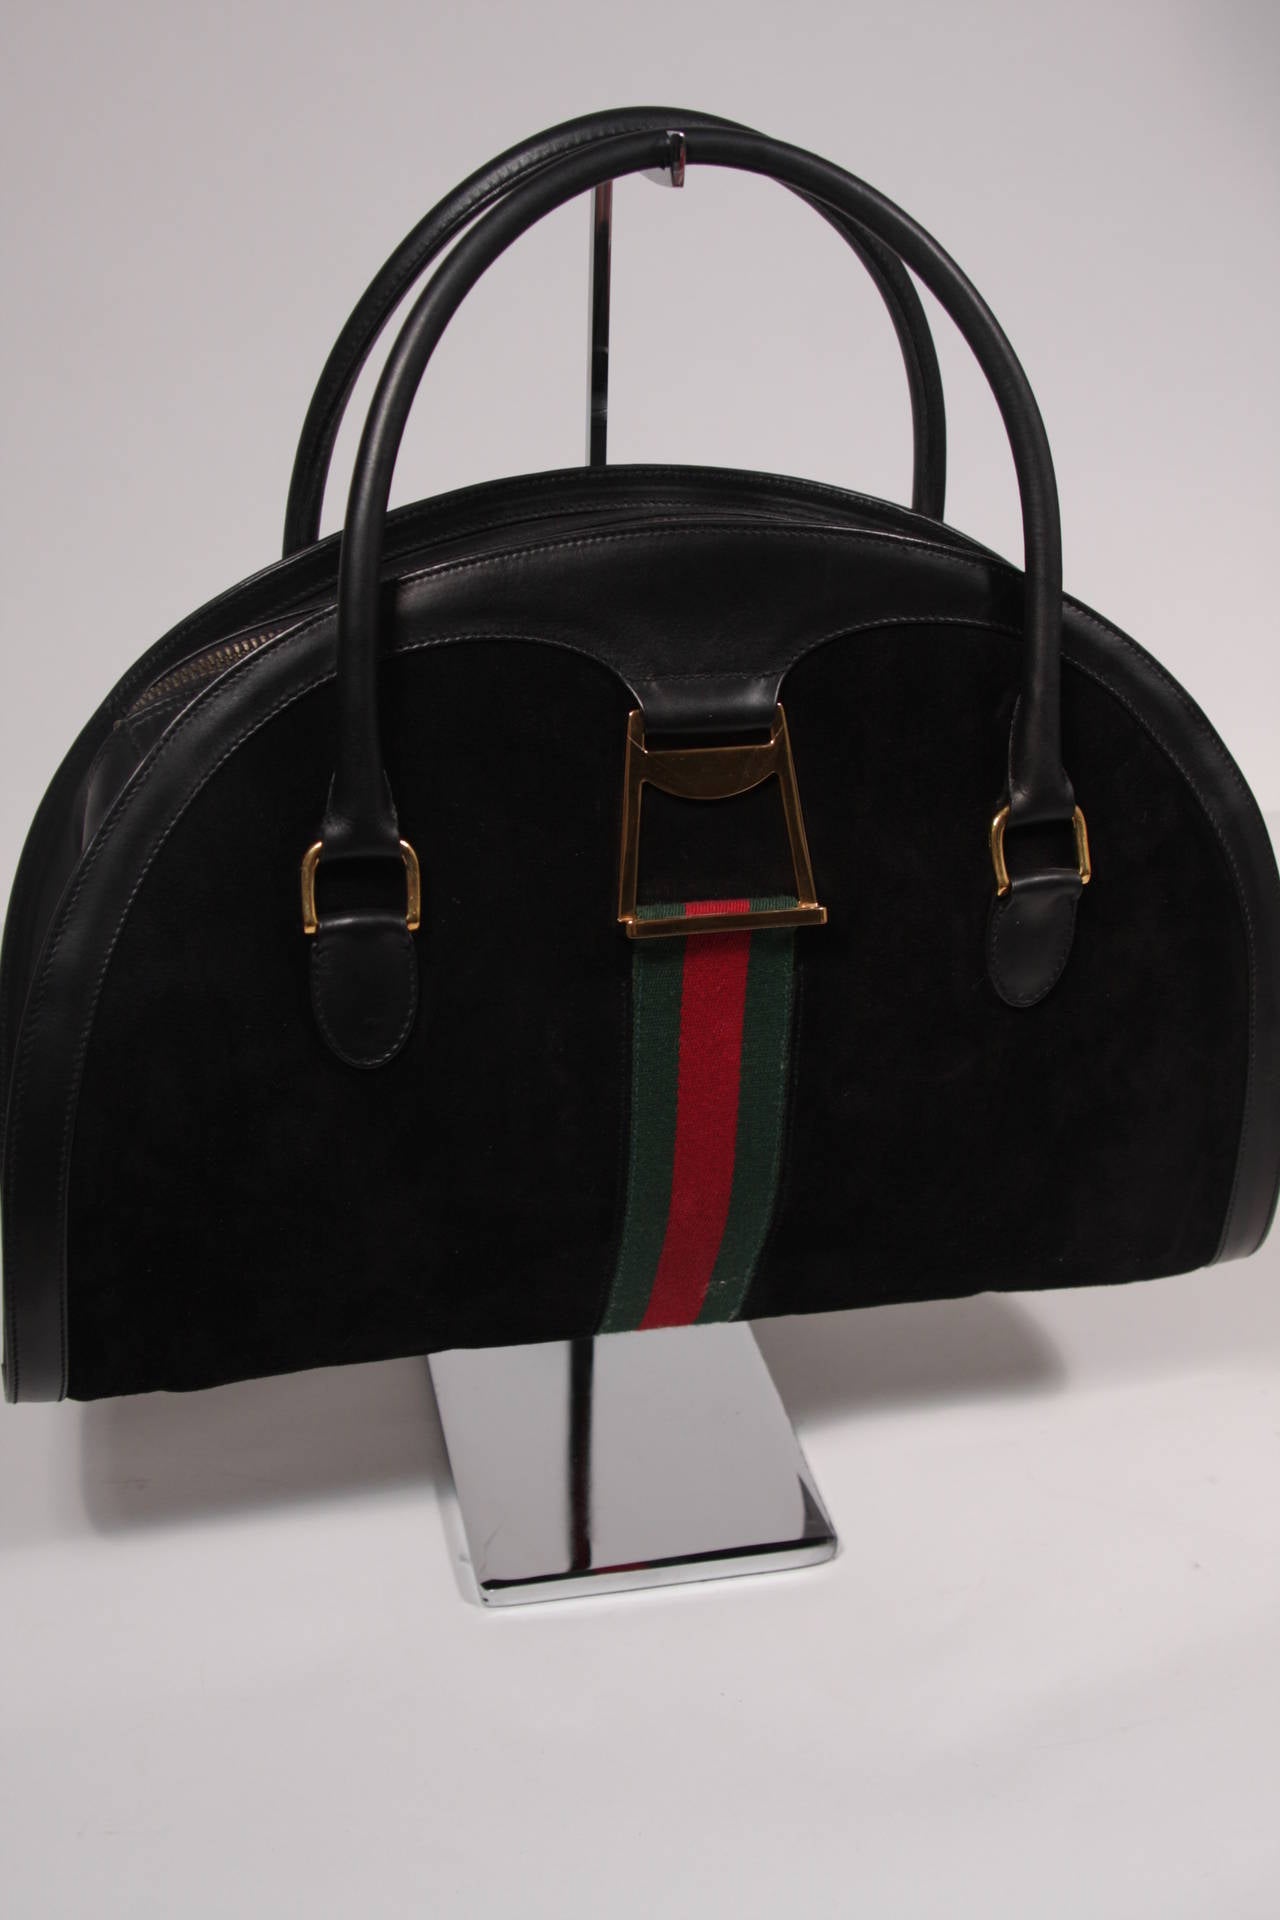 This is a wonderful Gucci vintage handbag. The purse features a classic Gucci green and red stripe with gold hardware. There is a top zipper closure which is tarnished. The handbag itself appears practically unused, except for the discoloration and